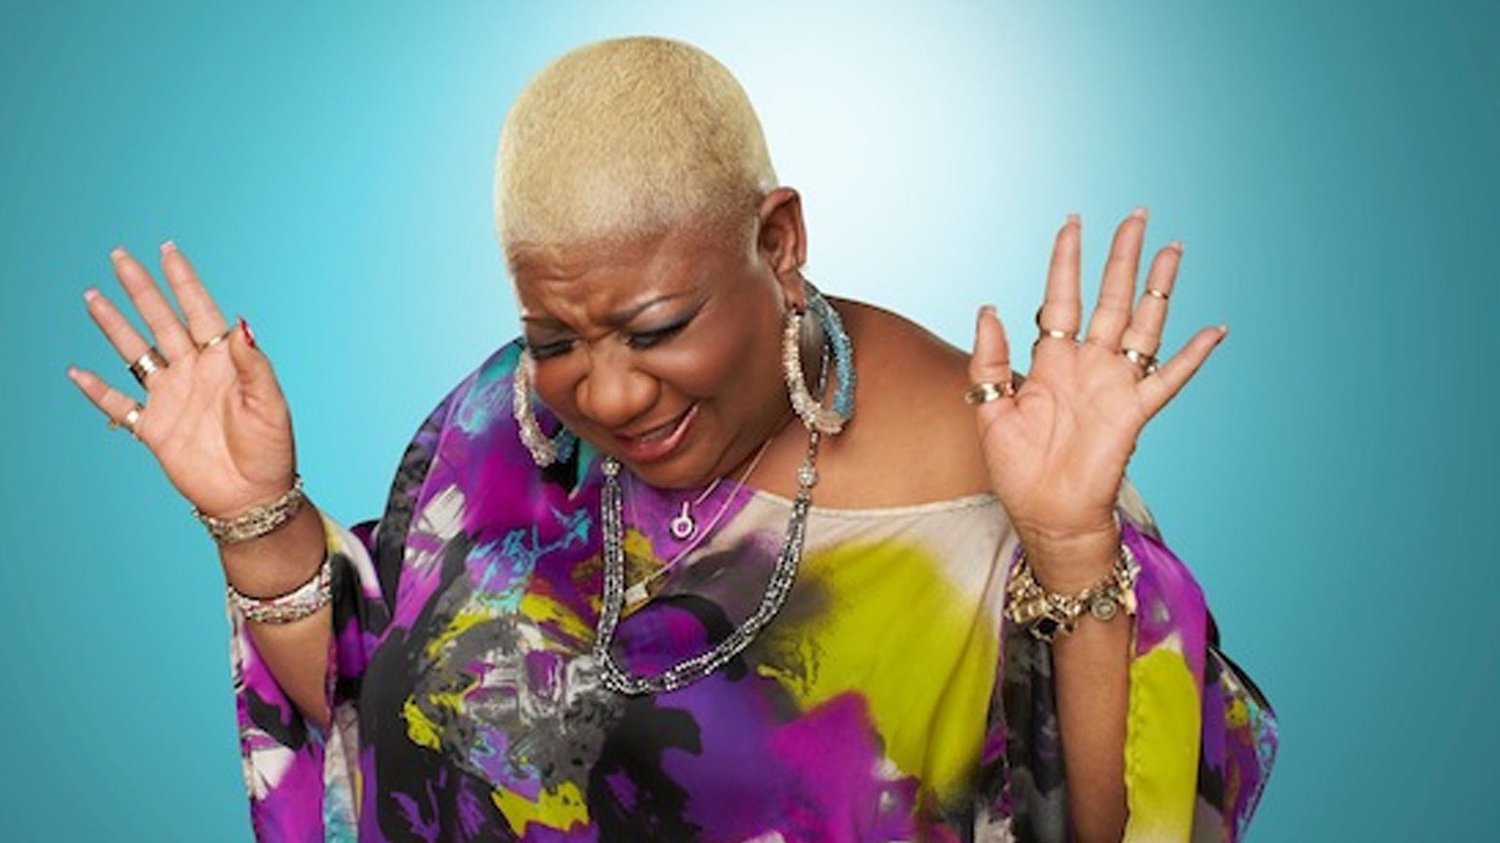 USC Comedy with Luenell